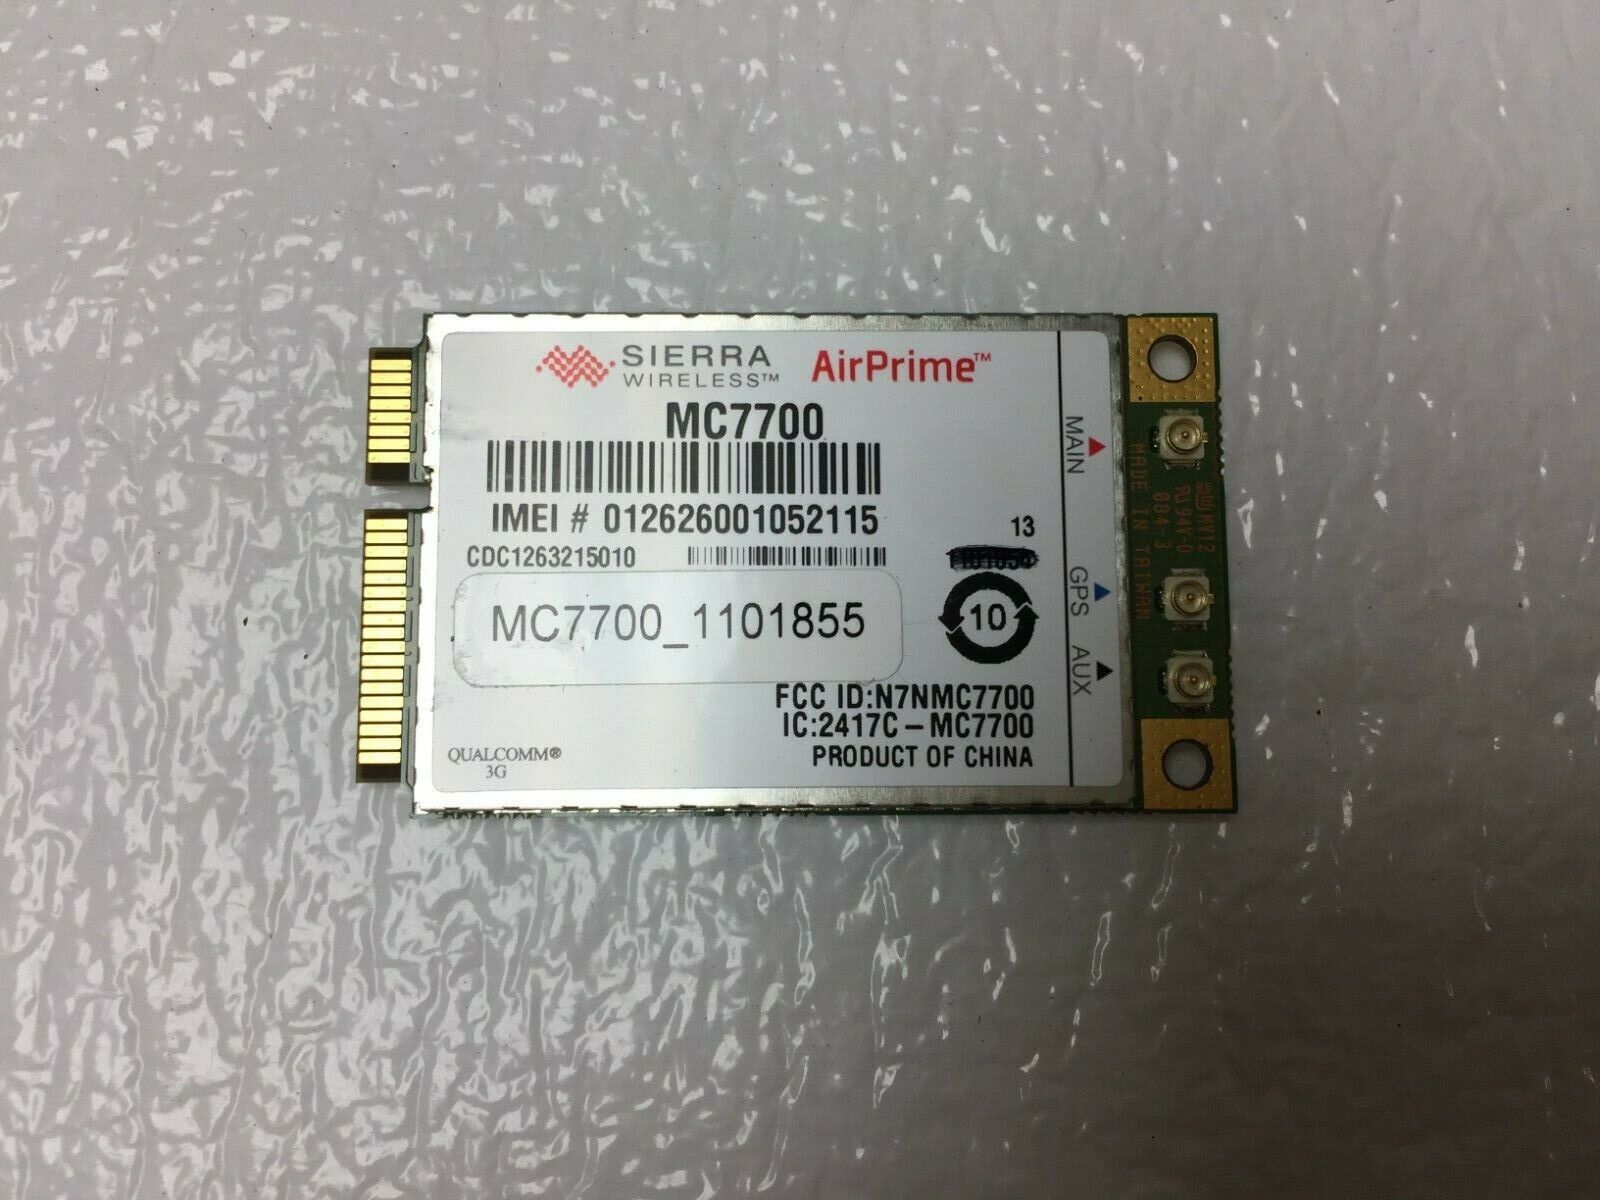 Sierra AirPrime MC7700 100Mbps HSPA+ 4G LTE 700MHz WWAN Module Card+GPS. Available Now for $8.00